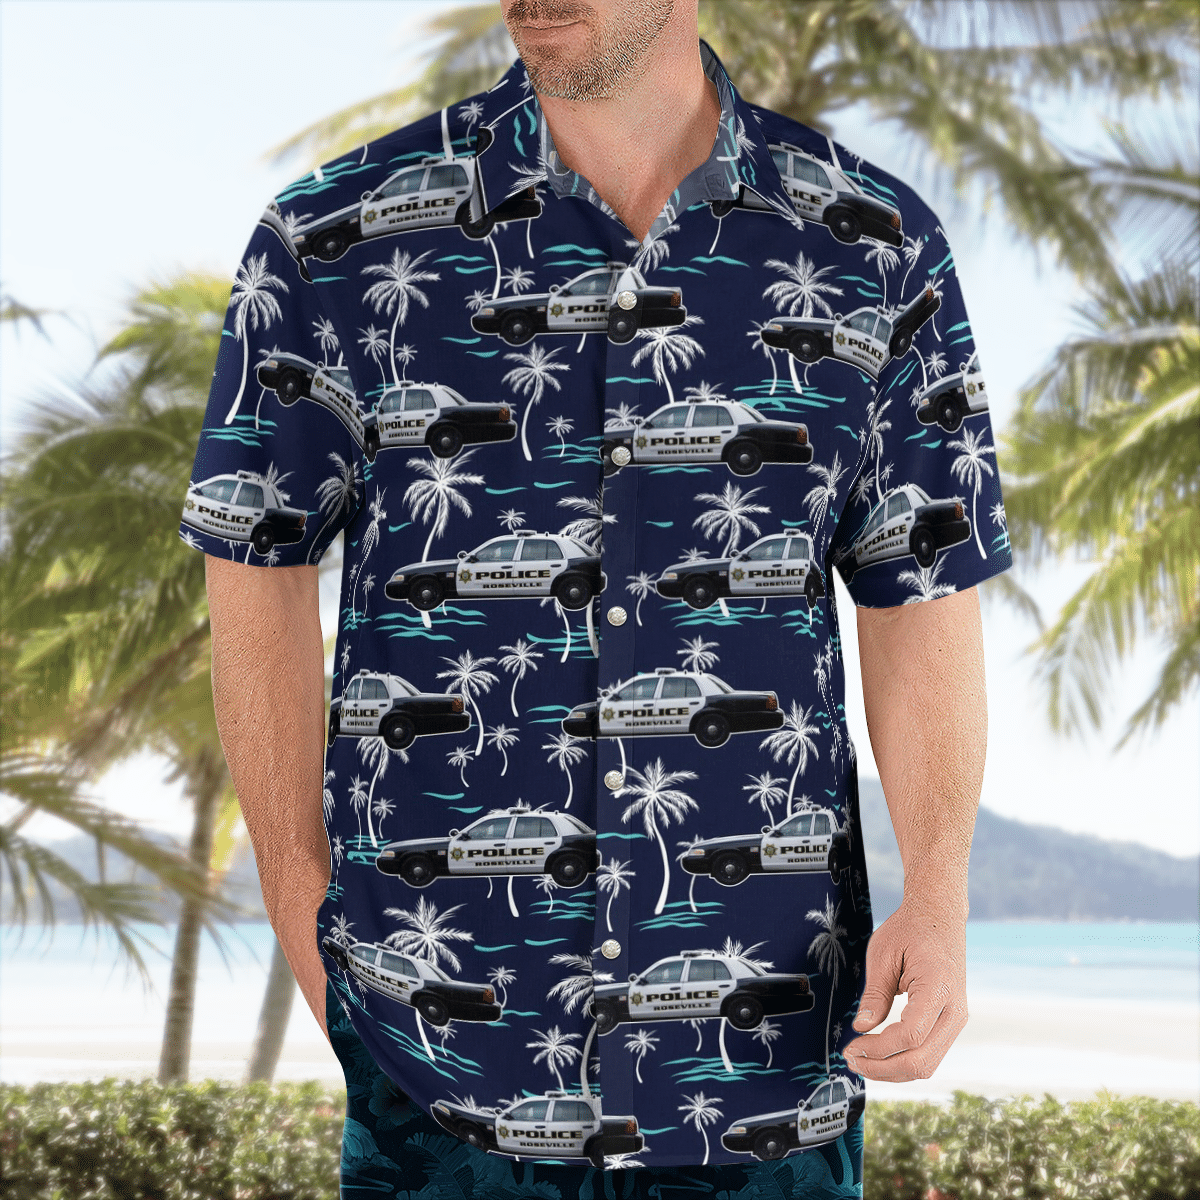 There are several styles of beach and Hawaiian shorts and tops to choose from 42